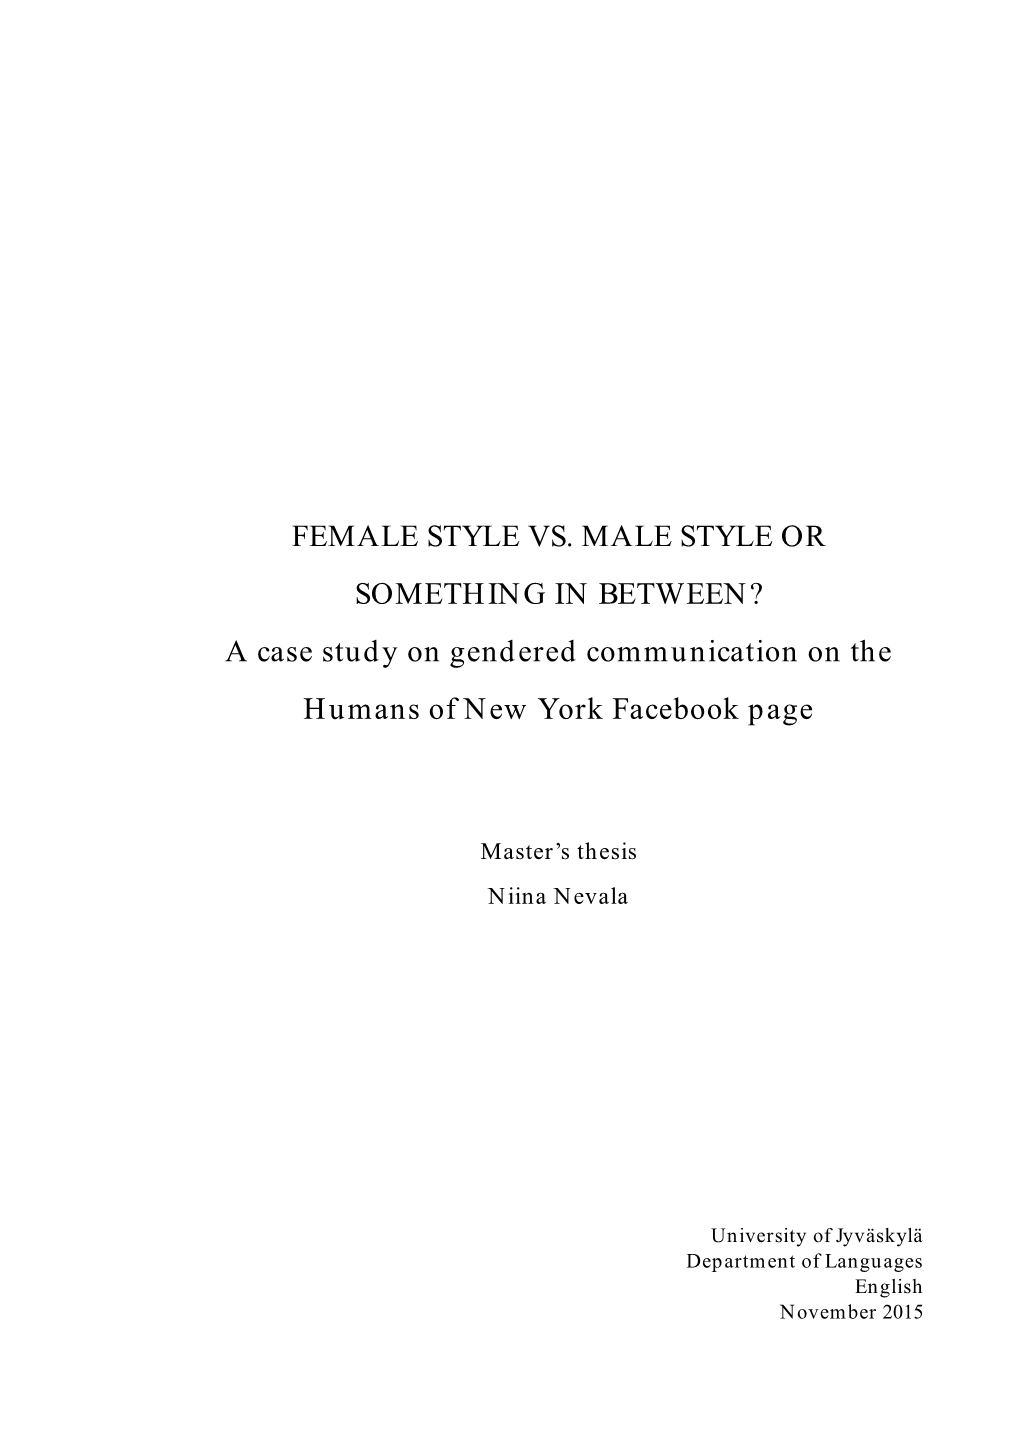 FEMALE STYLE VS. MALE STYLE OR SOMETHING in BETWEEN? a Case Study on Gendered Communication on the Humans of New York Facebook Page